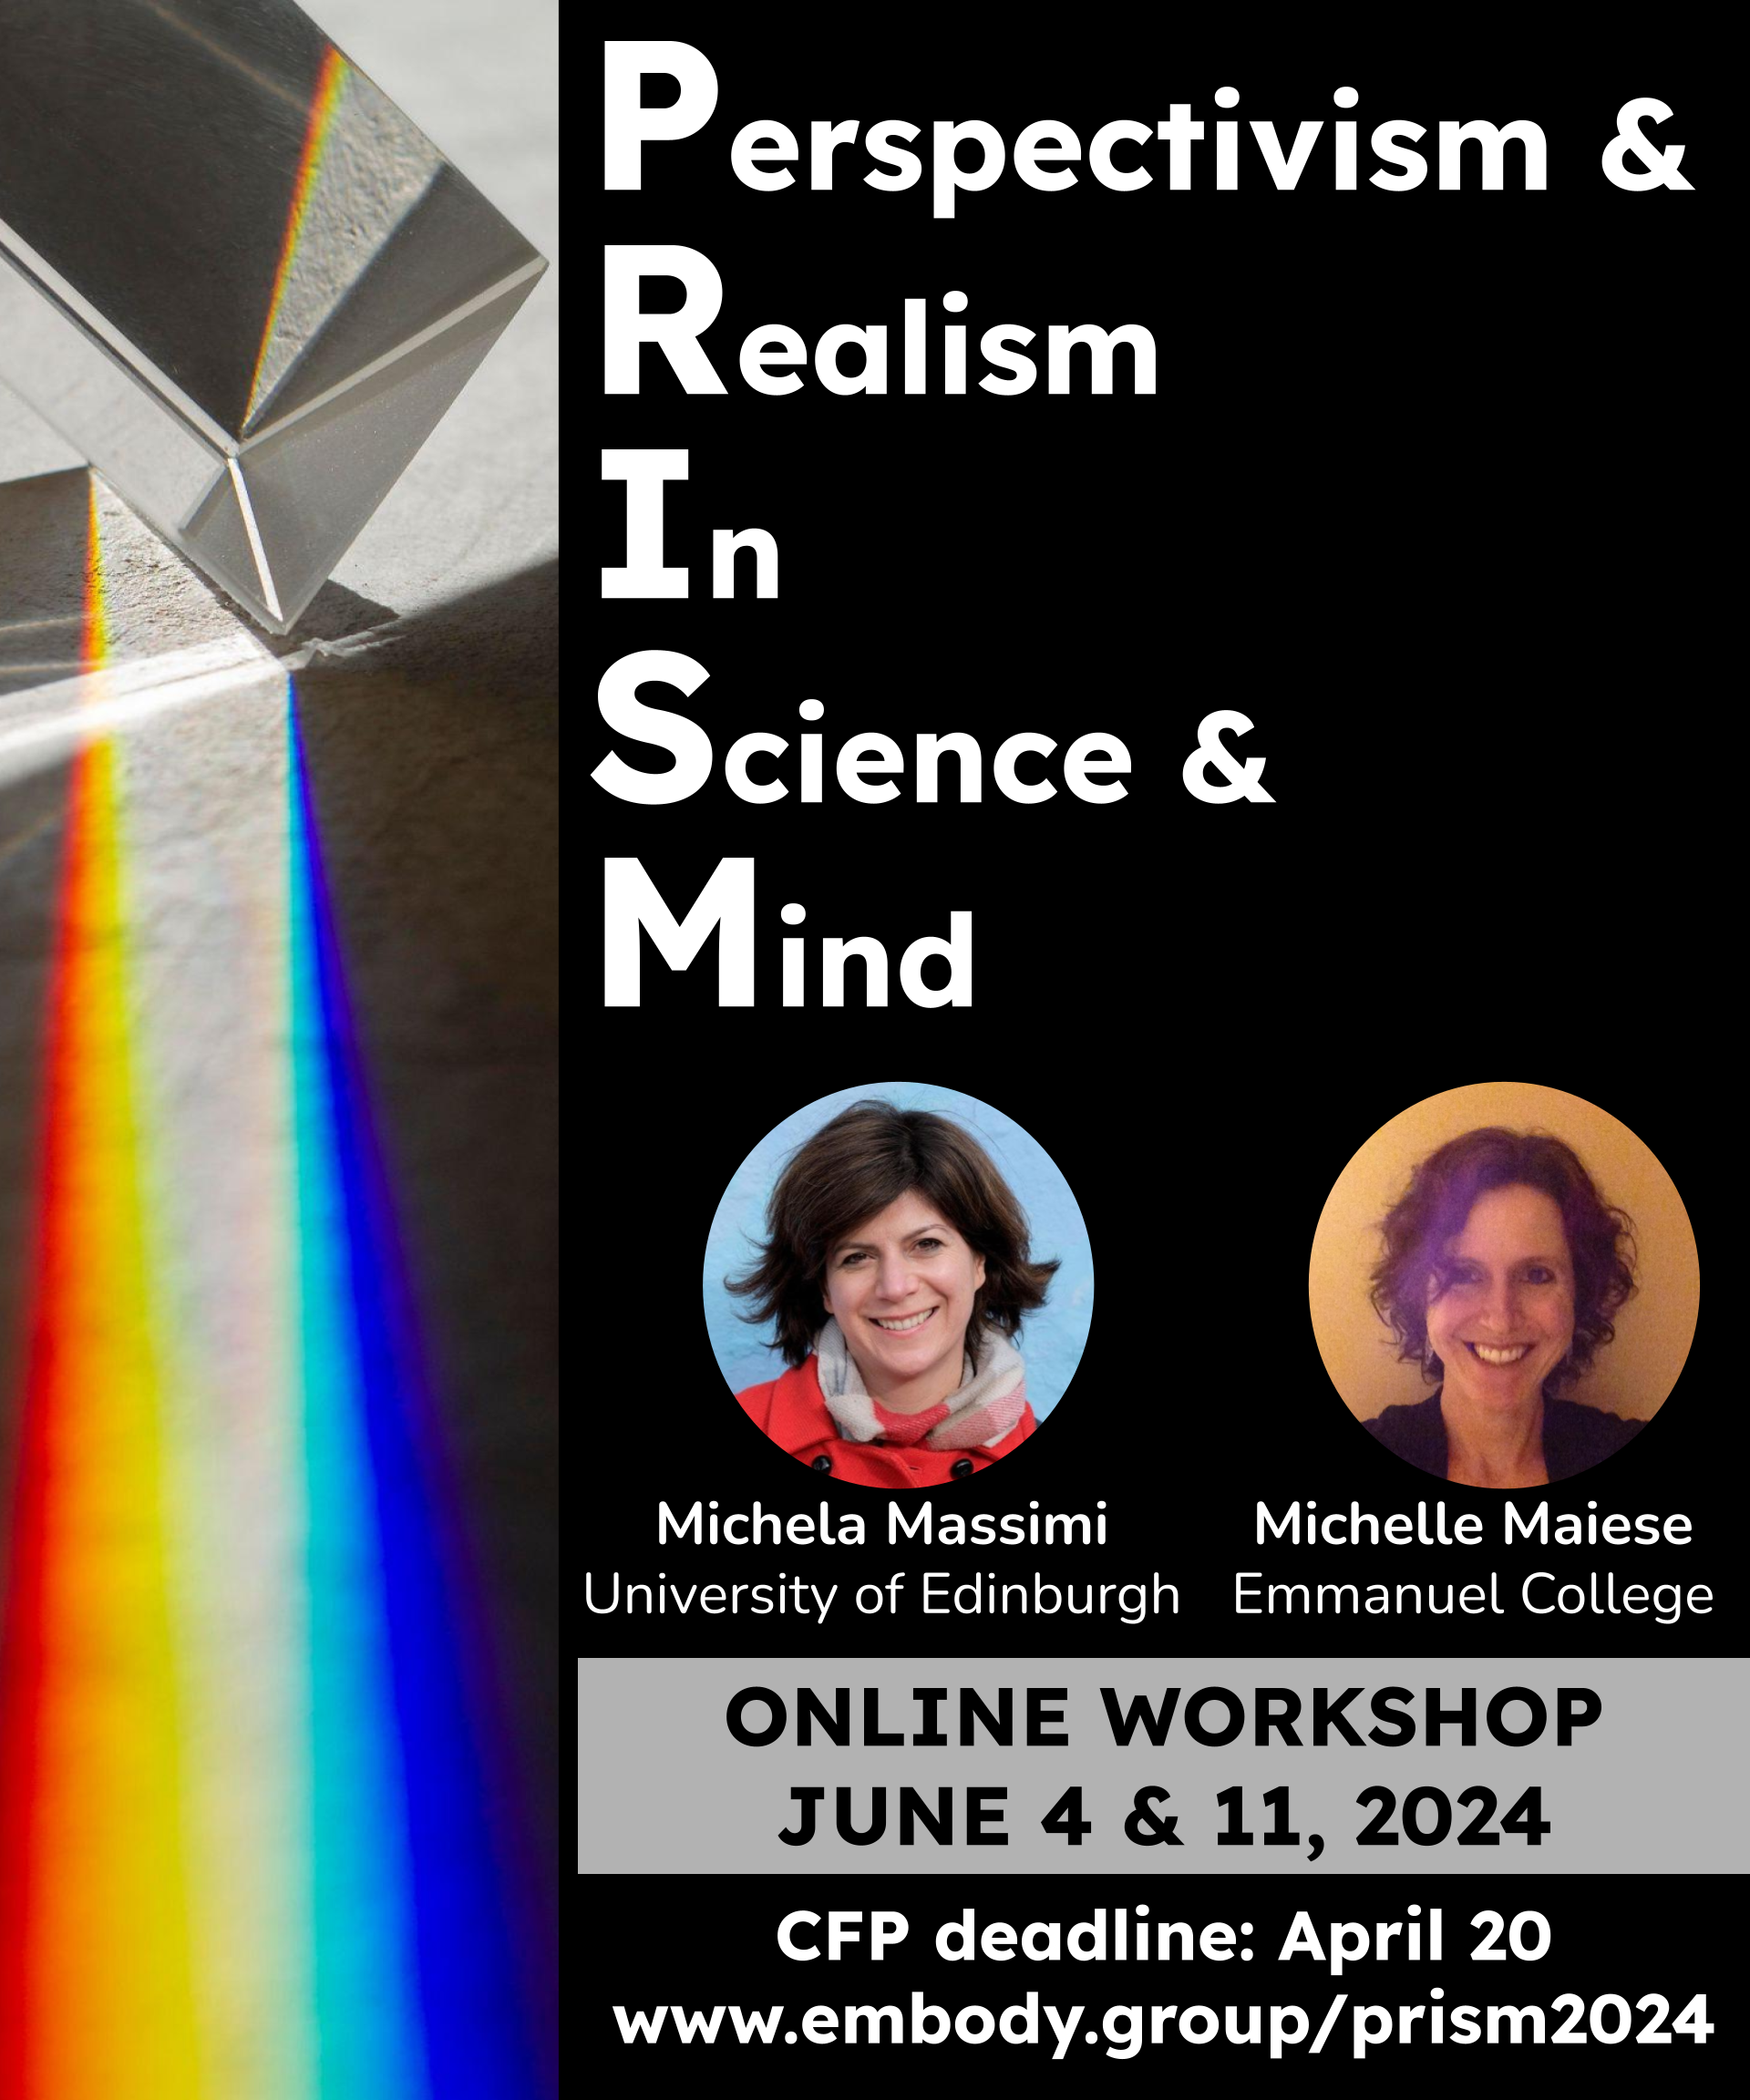 Perspectivism and Realism In Science and Mind (PRISM): June 4 & 11, 2024